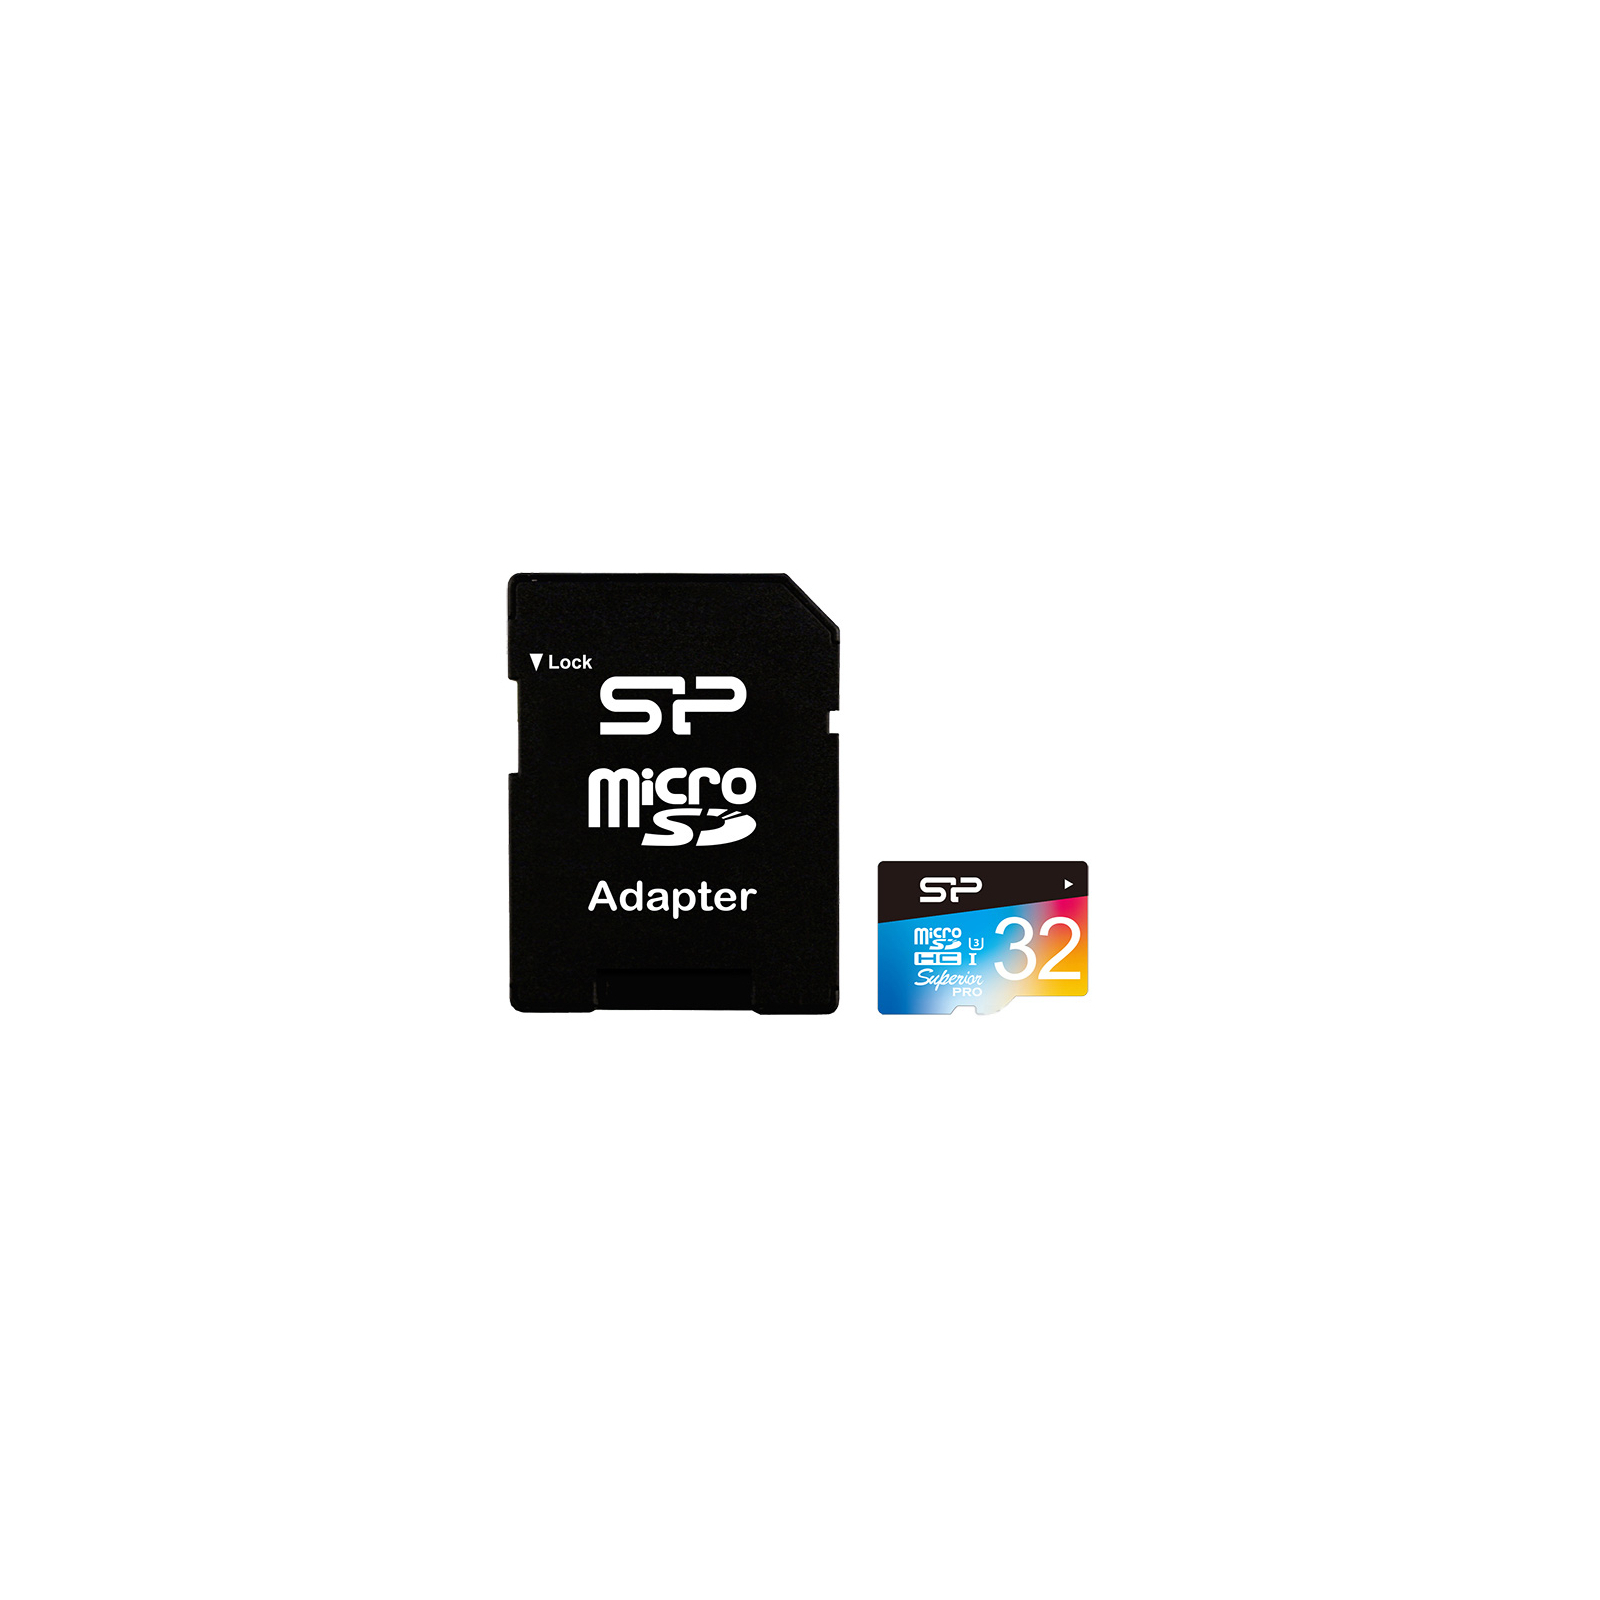 Карта памяти Silicon Power 32GB microSD class10 UHS-I Superior PRO COLOR (SP032GBSTHDU3V20SP)